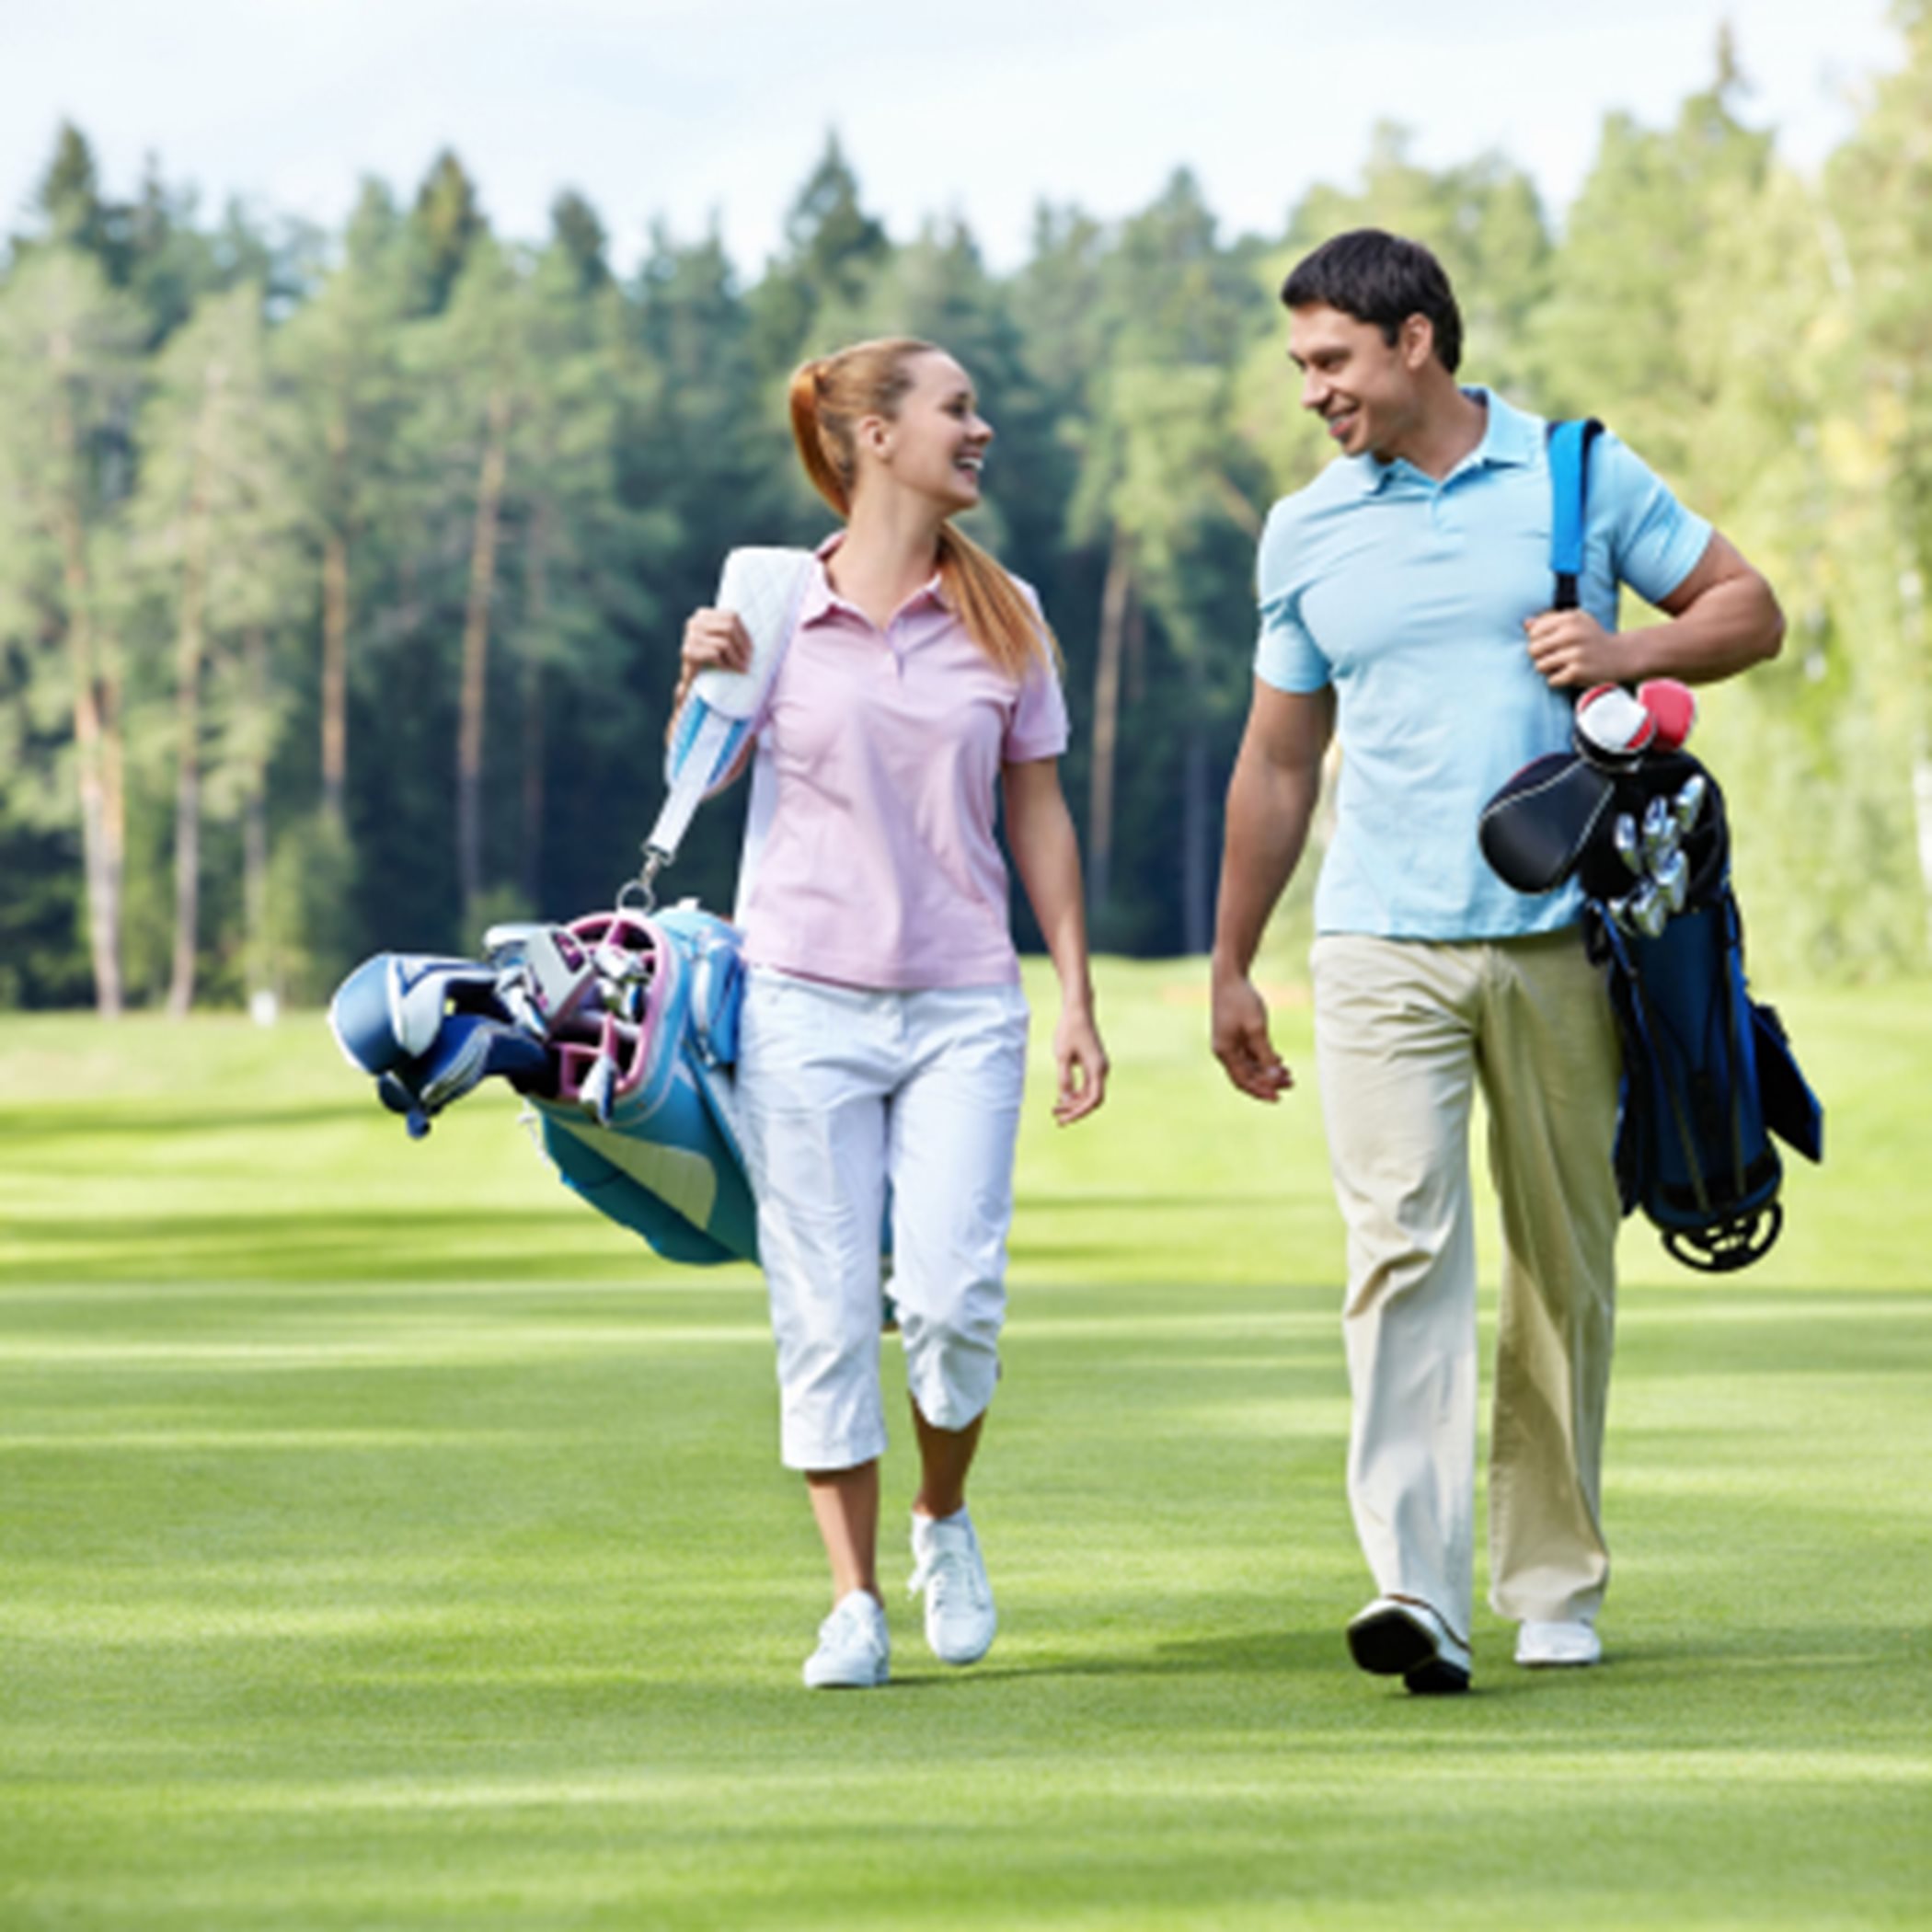 Two people walking on a golf course